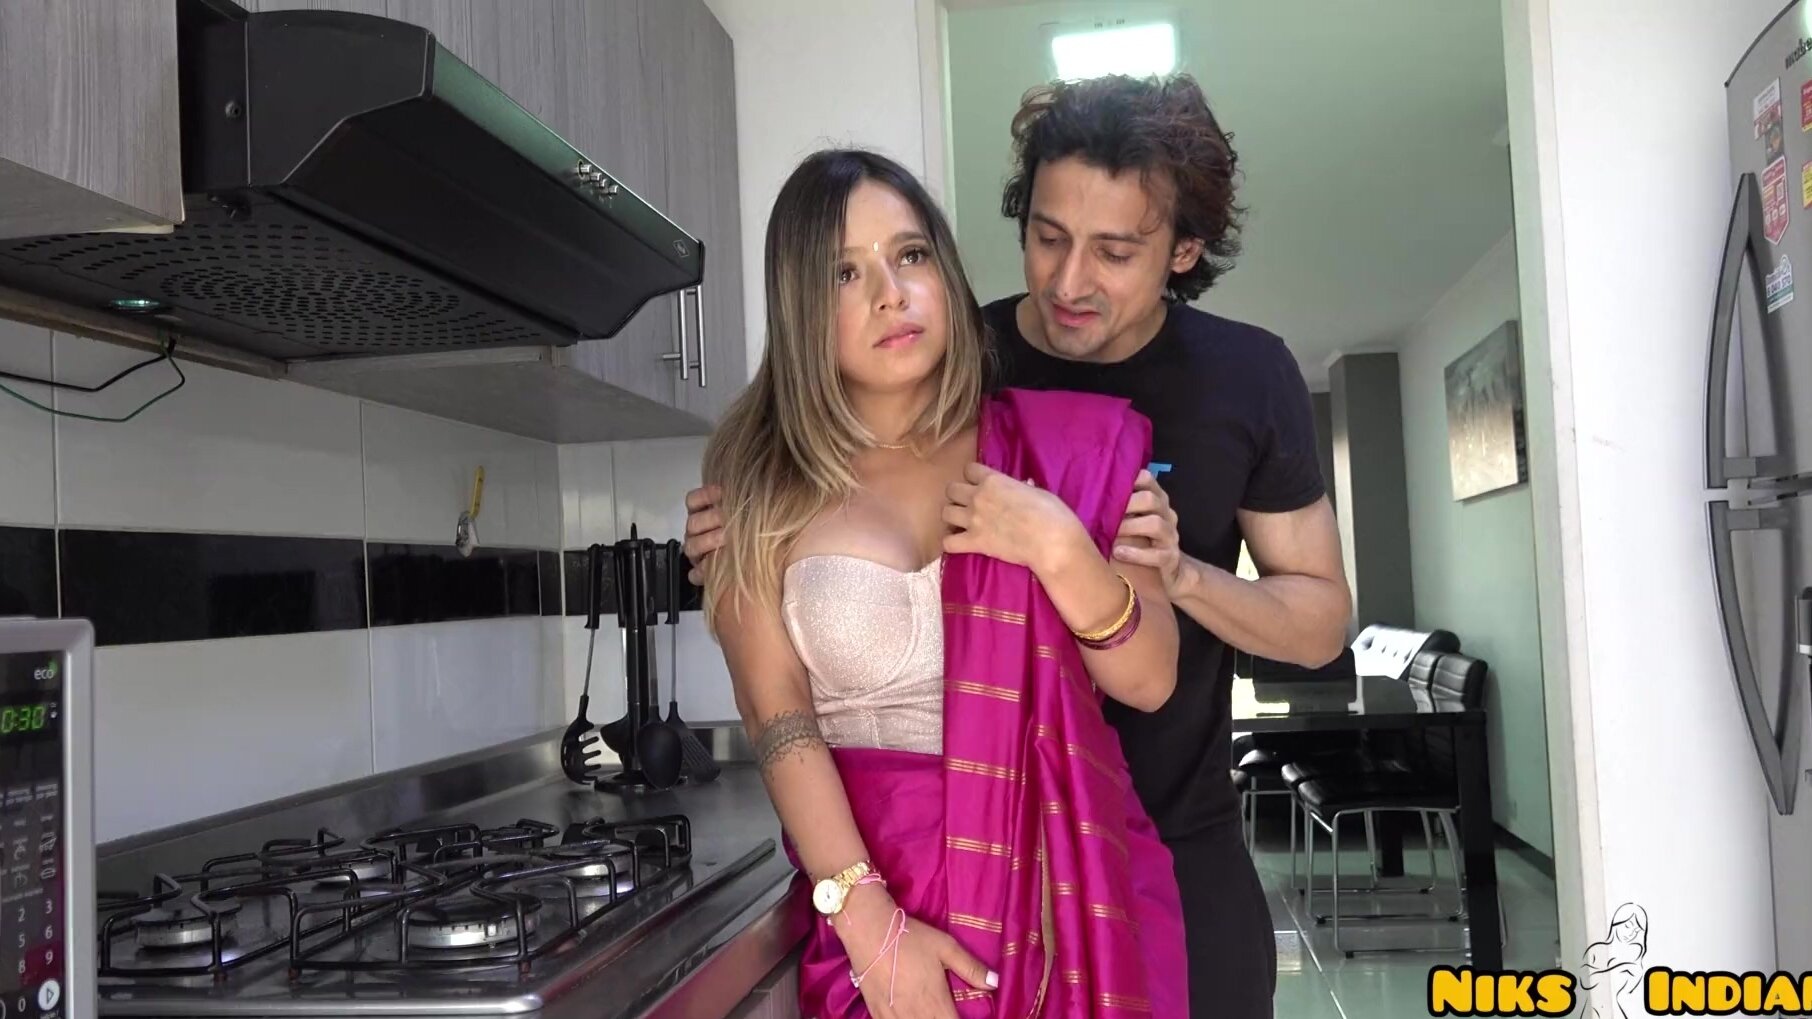 Shy Fit Busty Indian Wife Rushes Into a Passionate Kitchen Sex With Her Brother-in-law picture pic photo